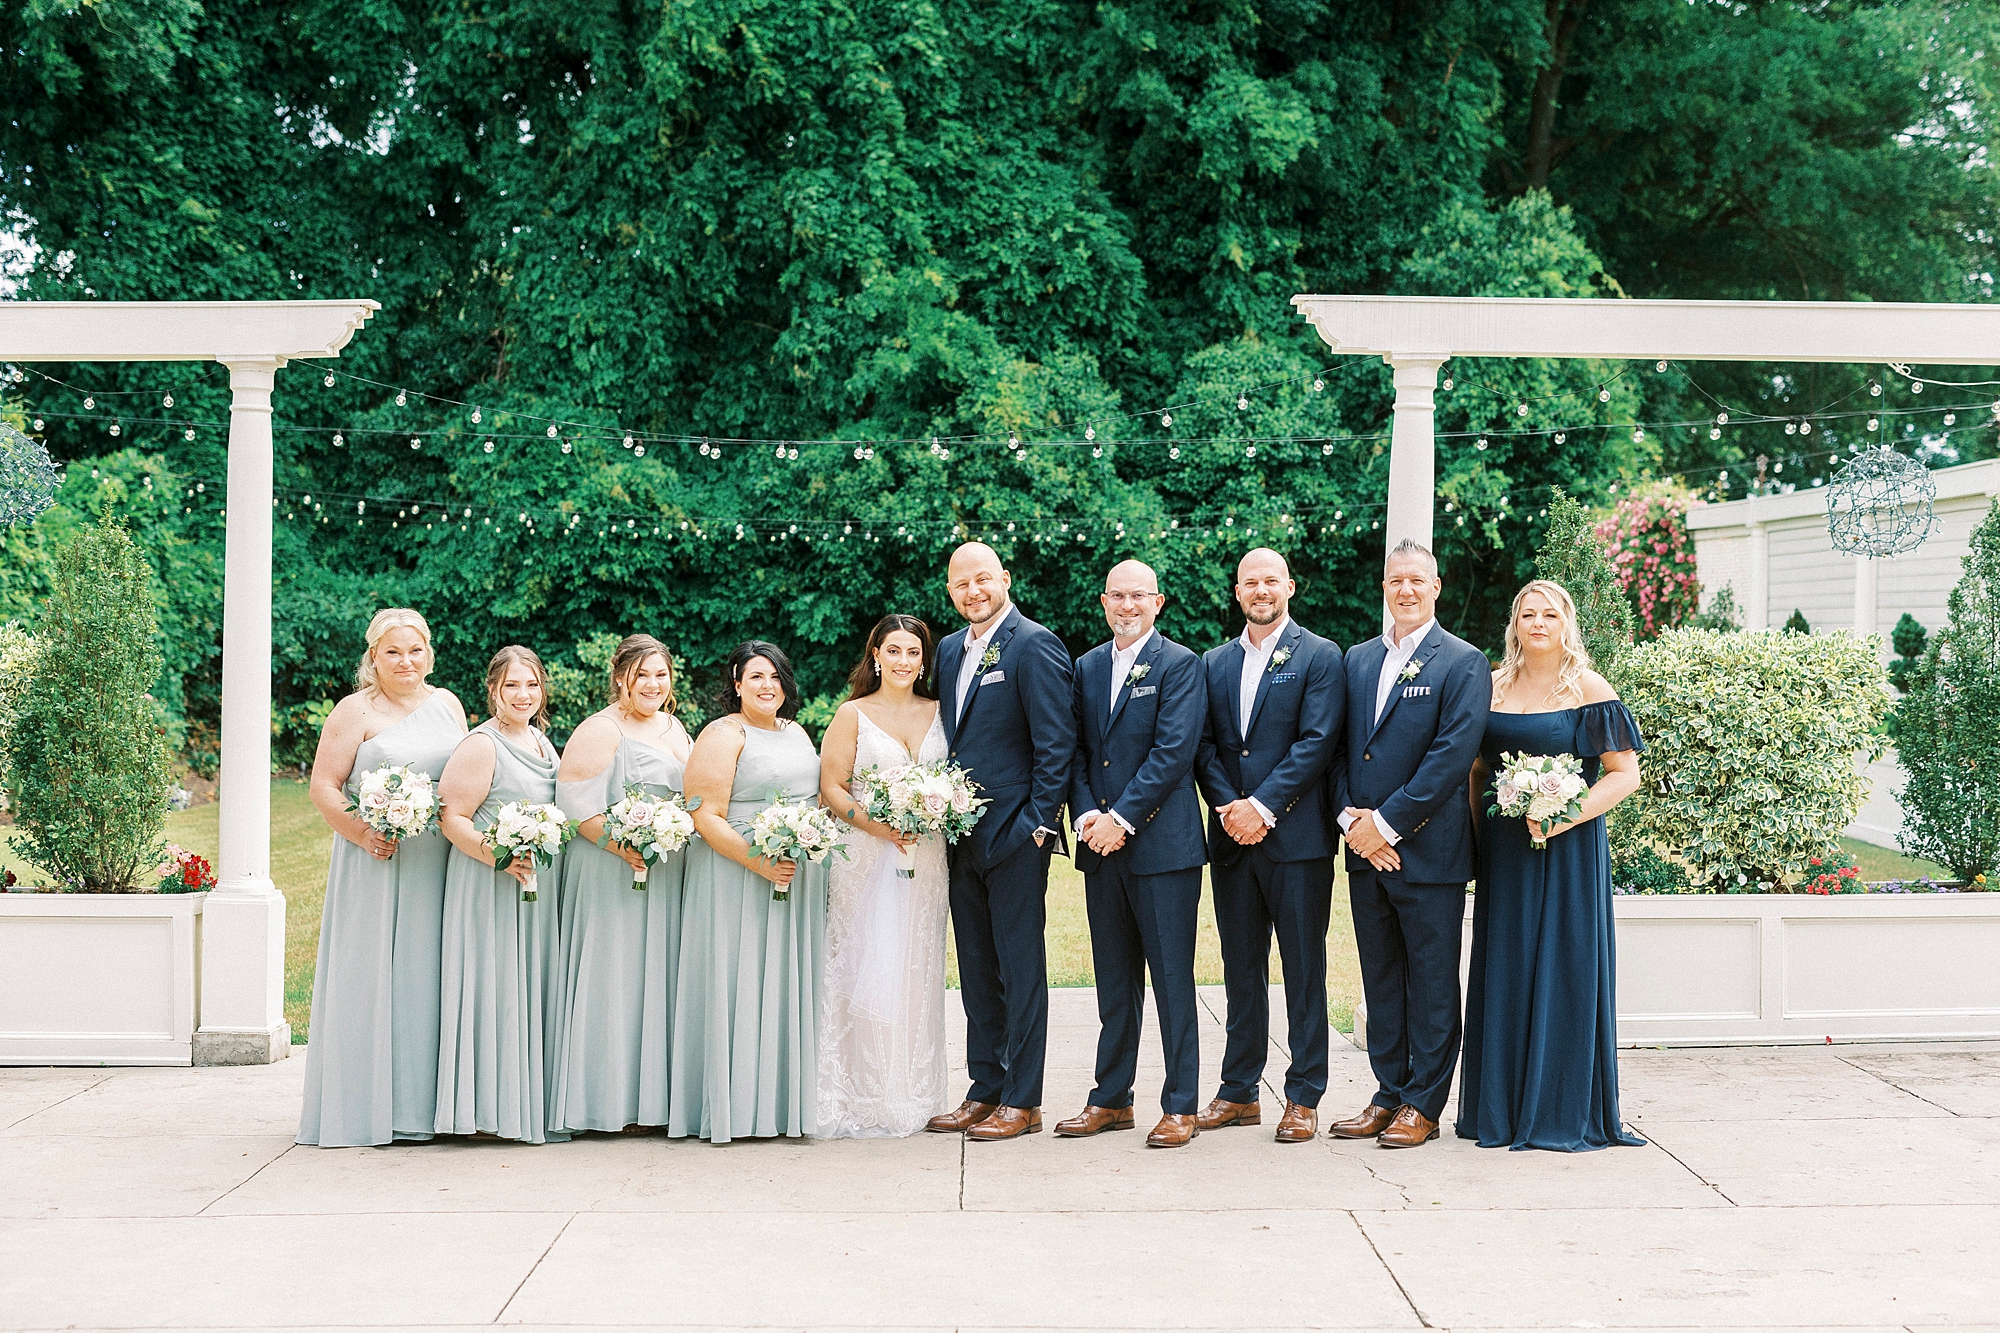 bride and groom stand with wedding party in light green dresses and navy suits